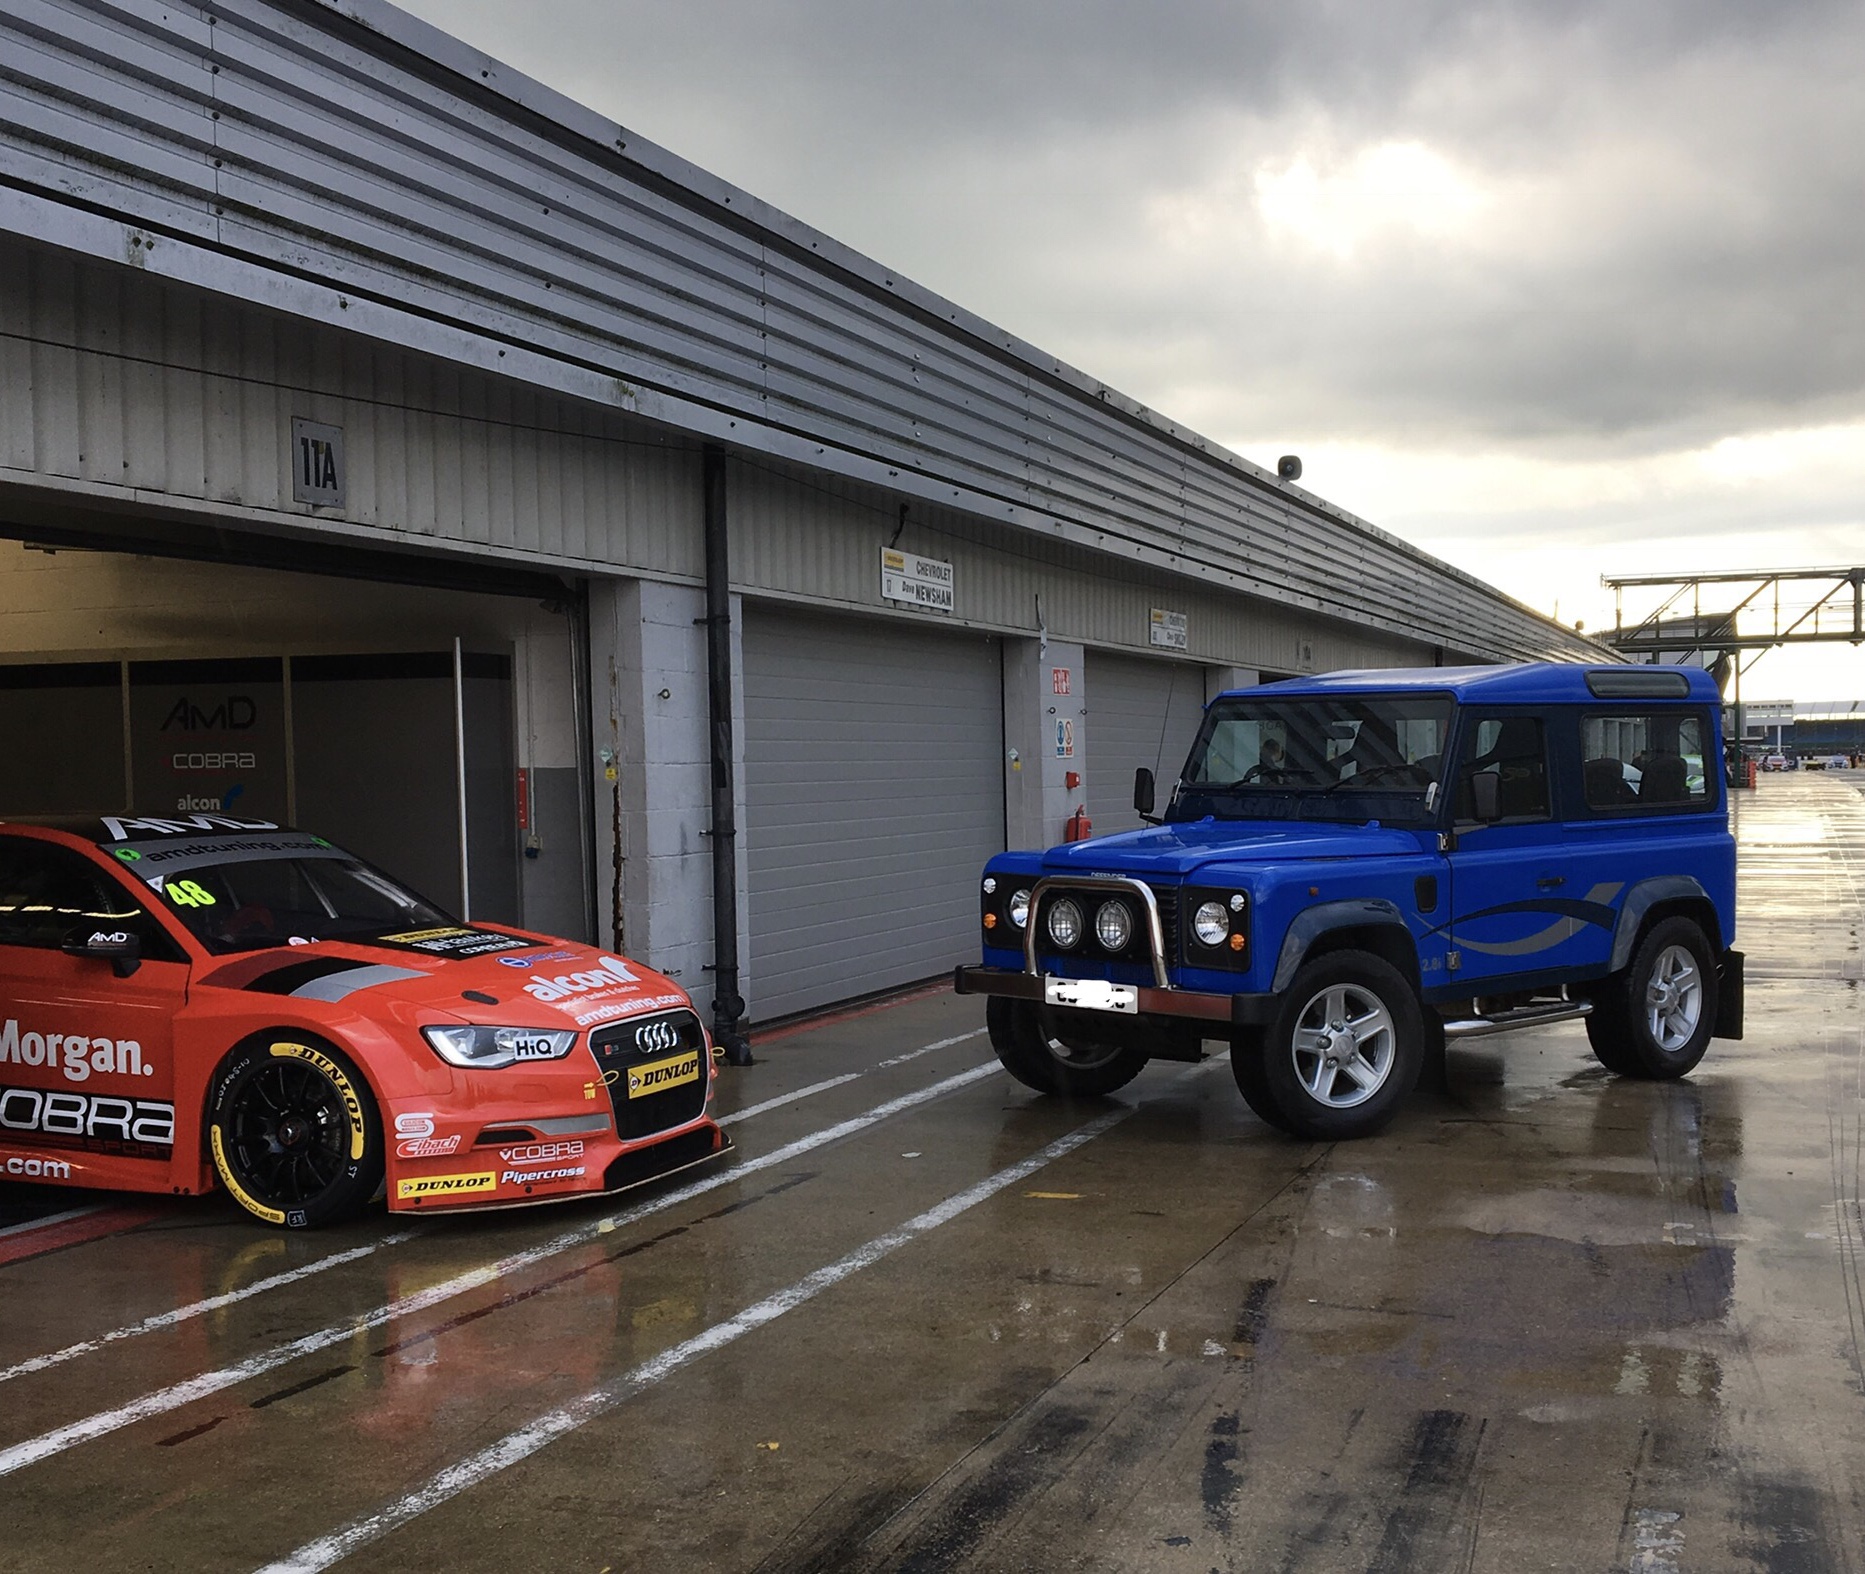 show us your land rover - Page 89 - Land Rover - PistonHeads